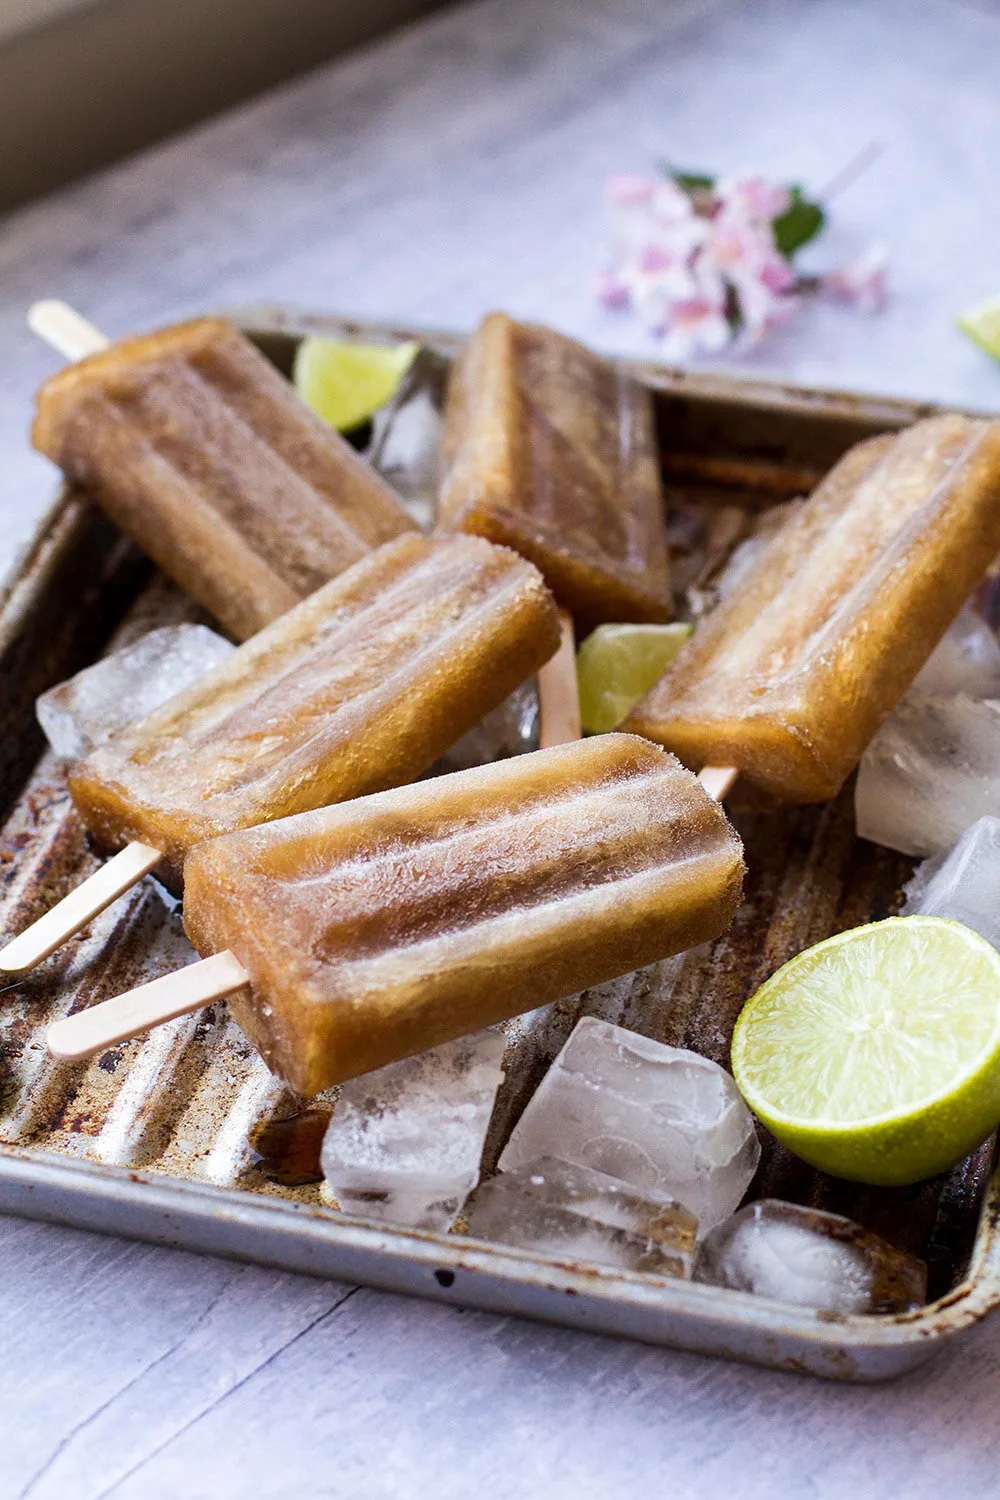 A metal tray with ice cubes, limes and Cuba Libre popsicles.